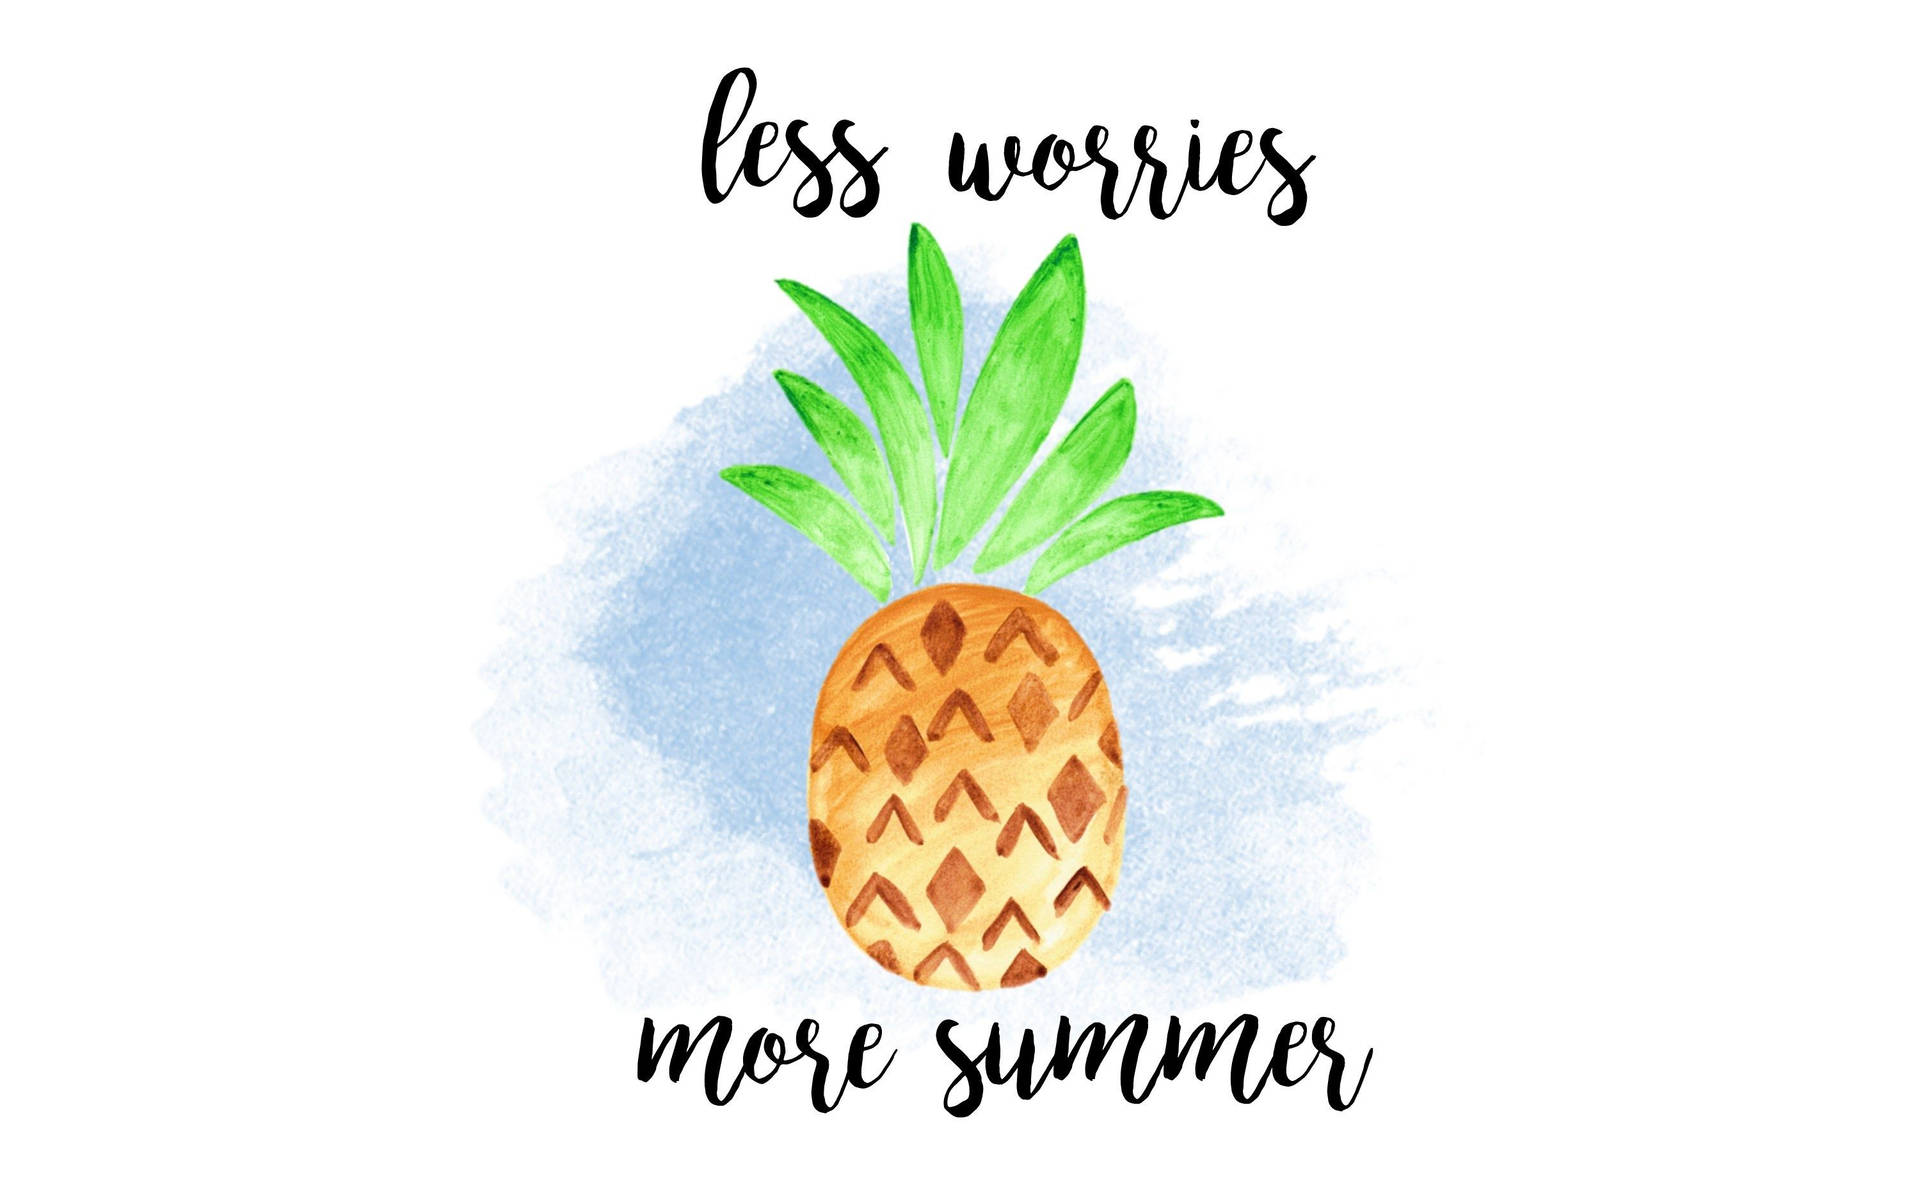 “Treat yourself sweetly like a Pineapple - Summer Quote” Wallpaper